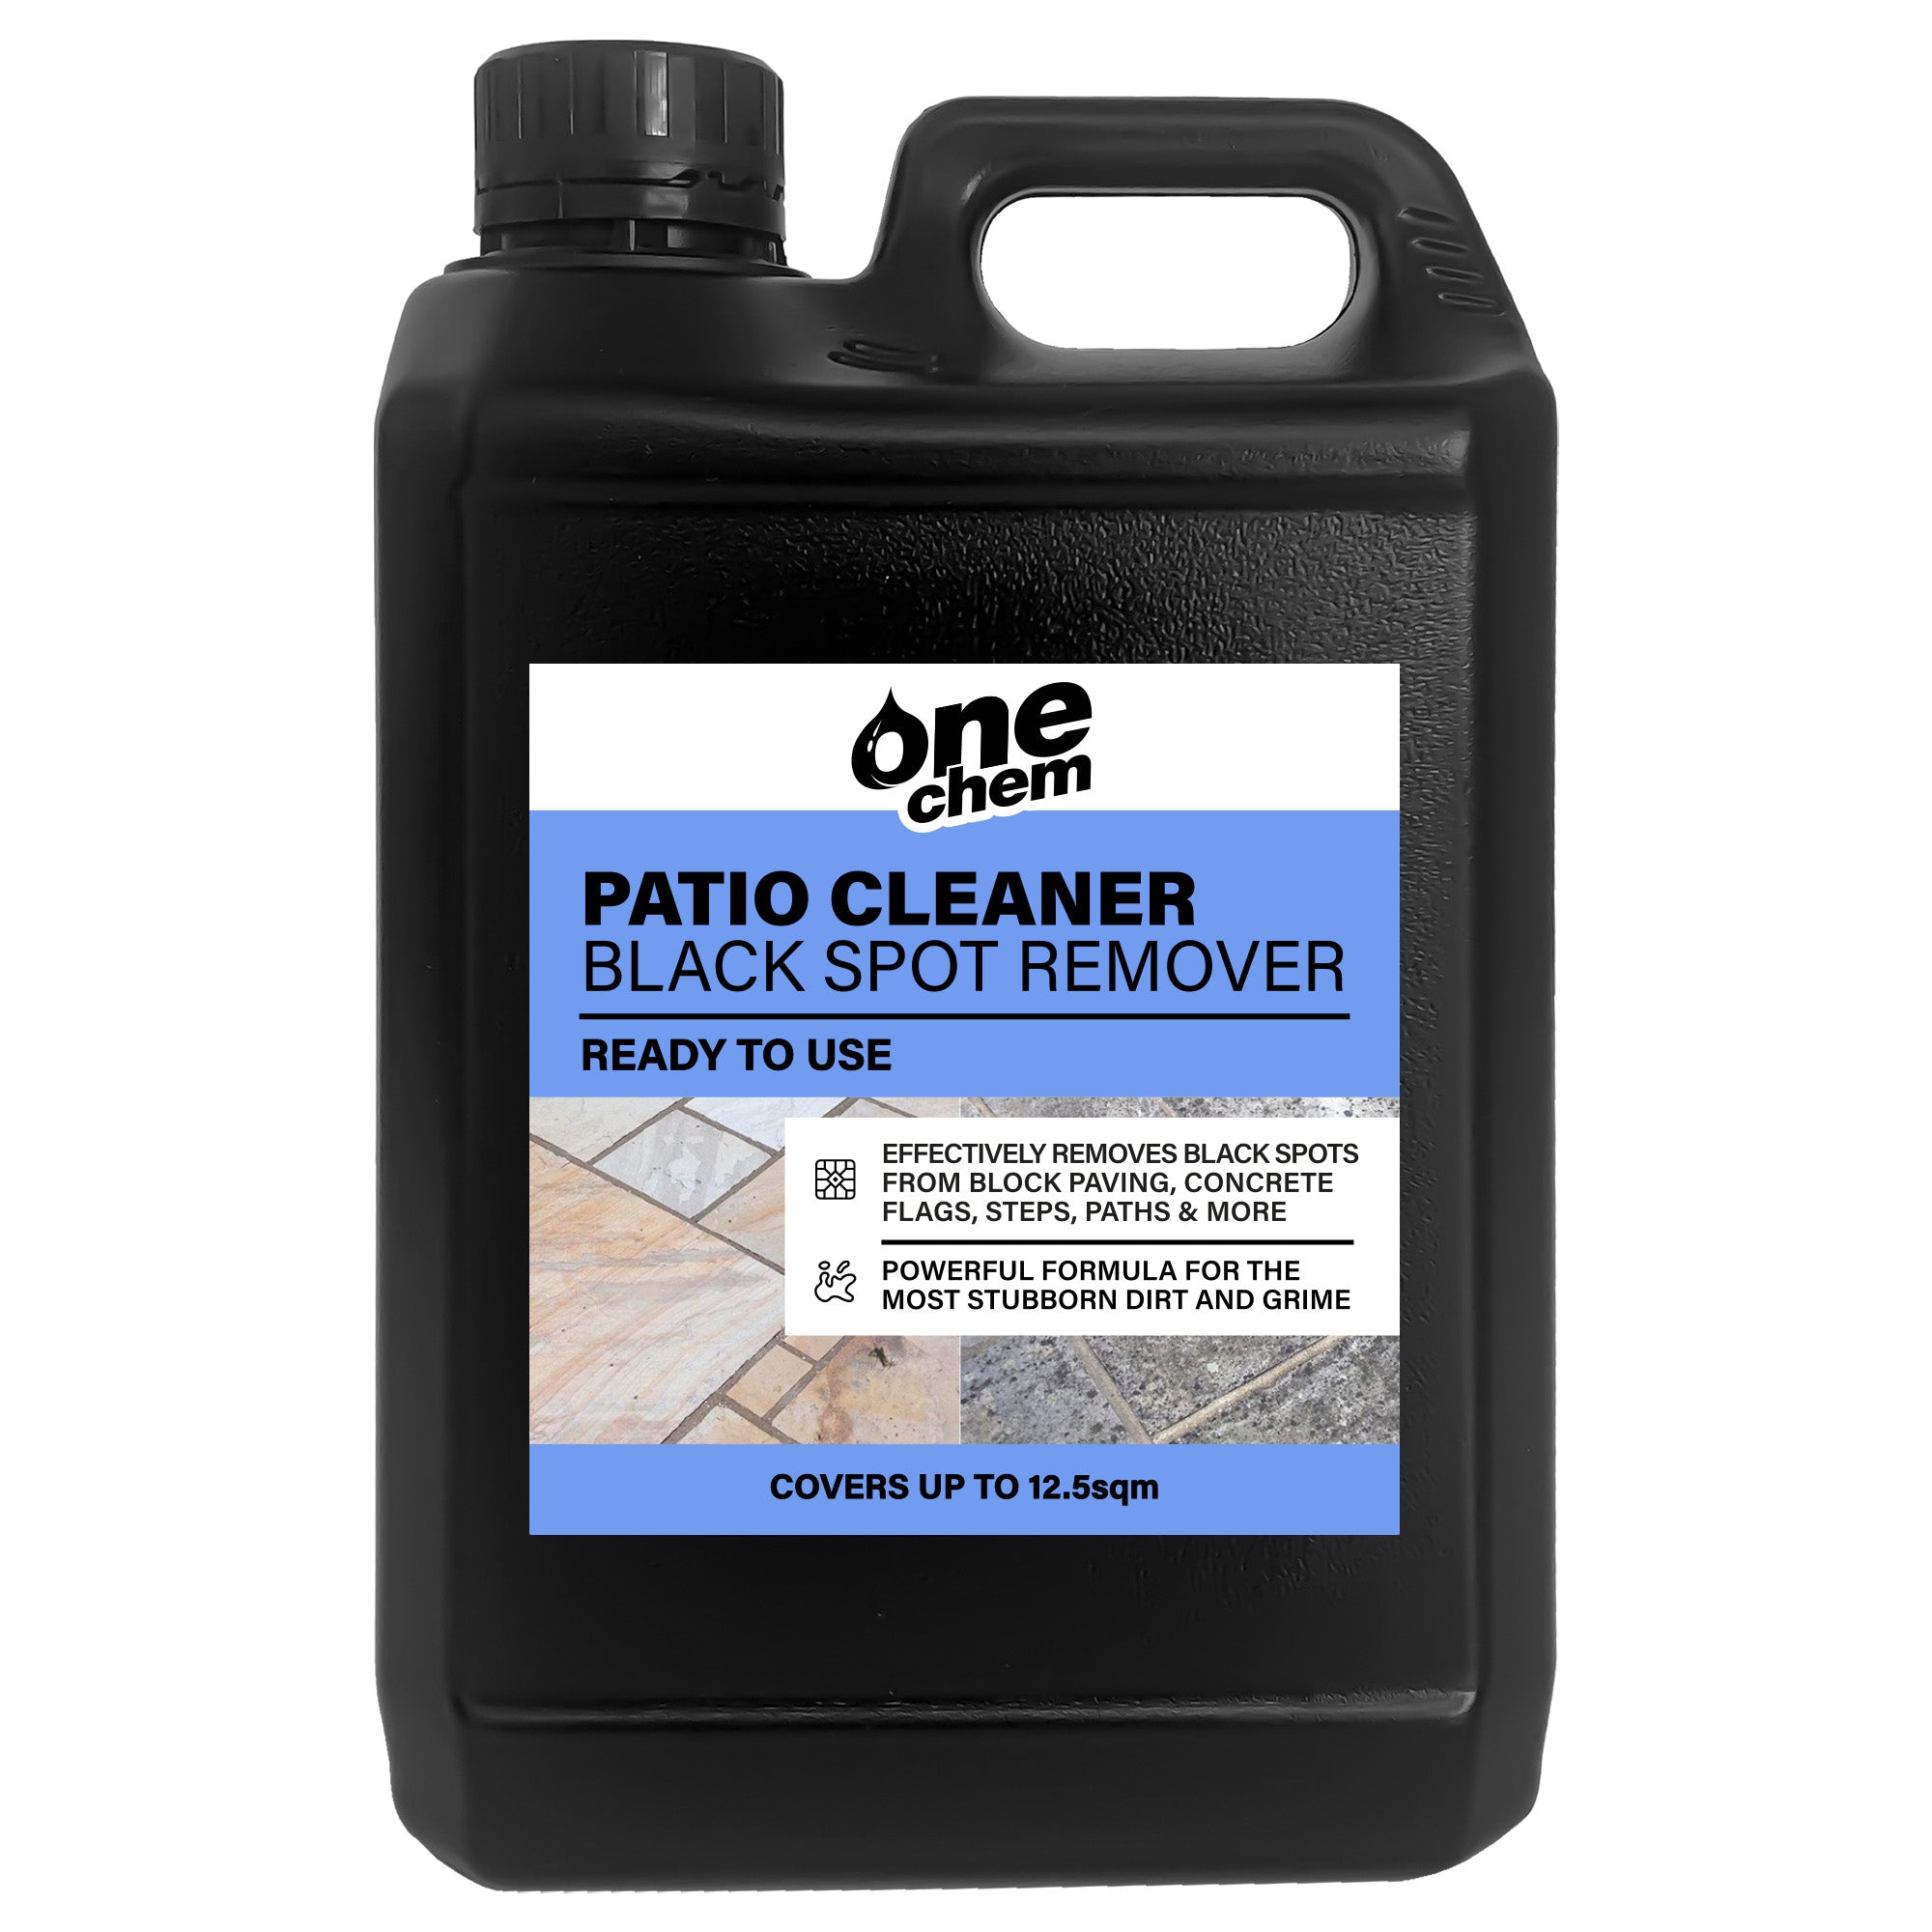 One Chem - Black Spot Remover - 2.5L - Ready to Use Patio Cleaner